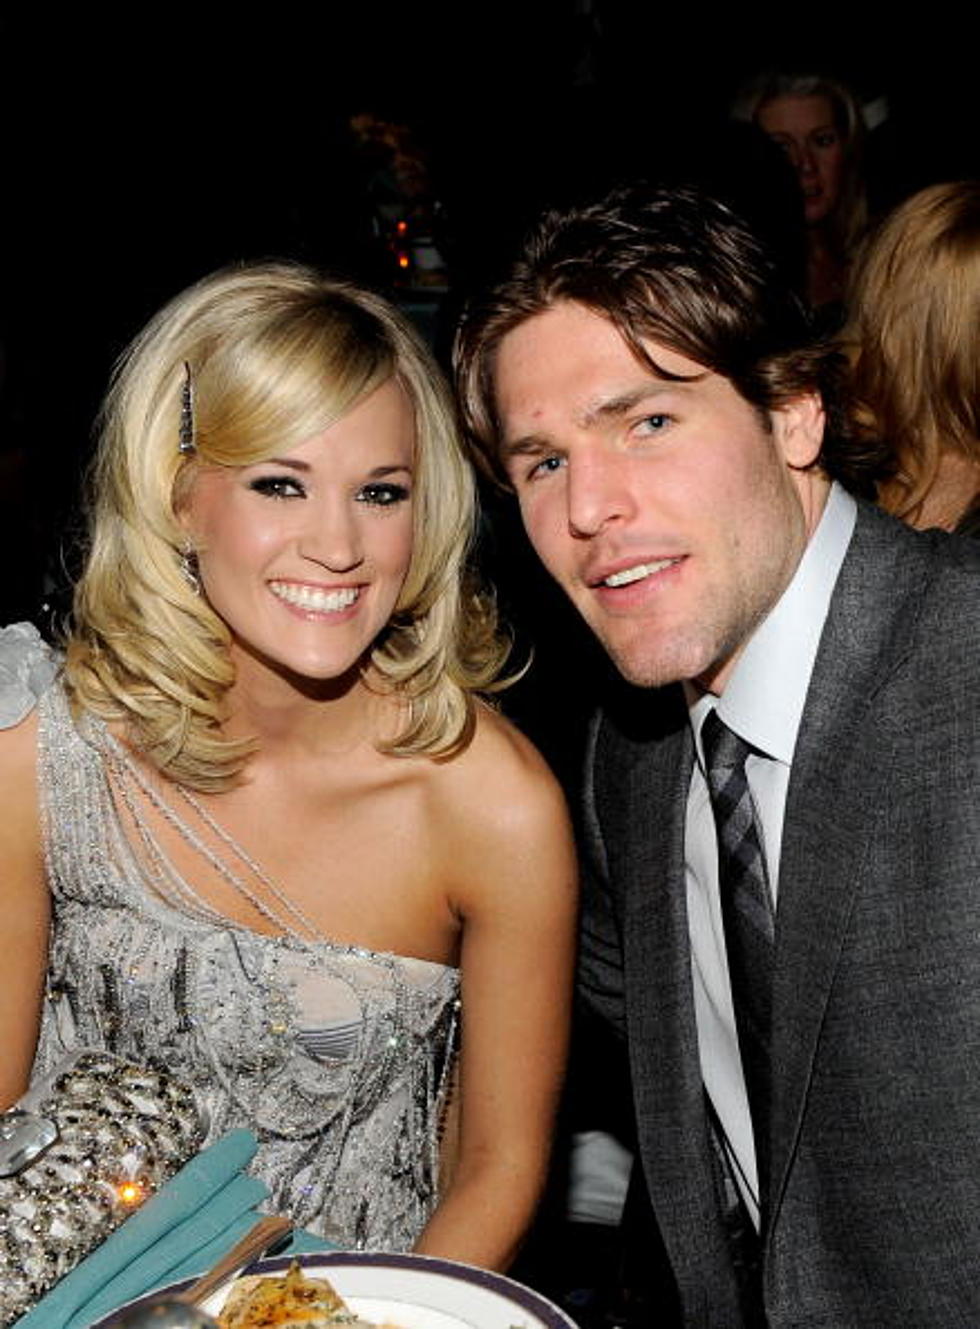 Carrie Underwood Opens Up About Marriage To ‘US Weekly’